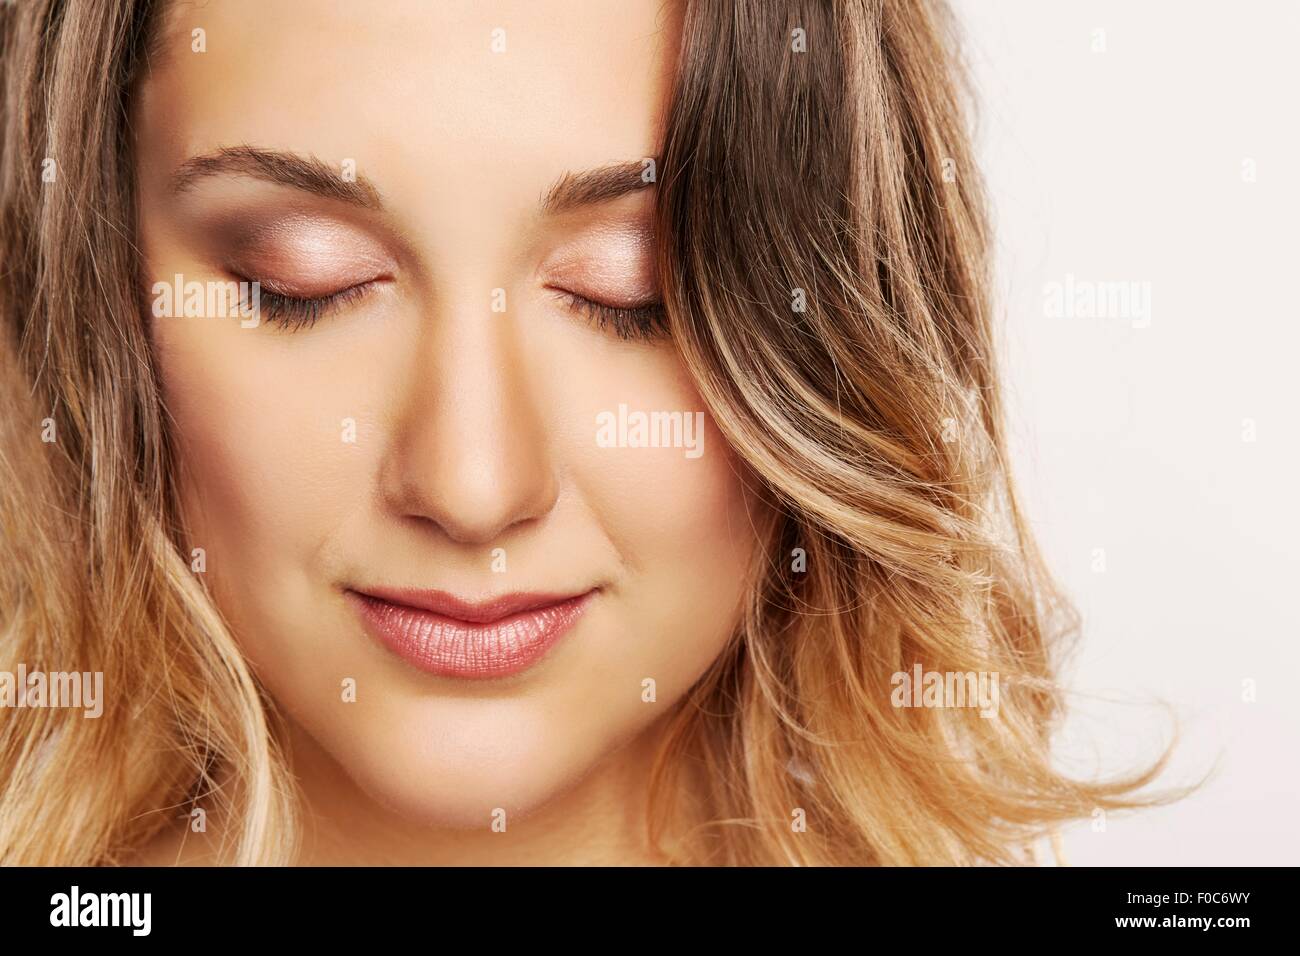 Young woman with eyes closed Stock Photo